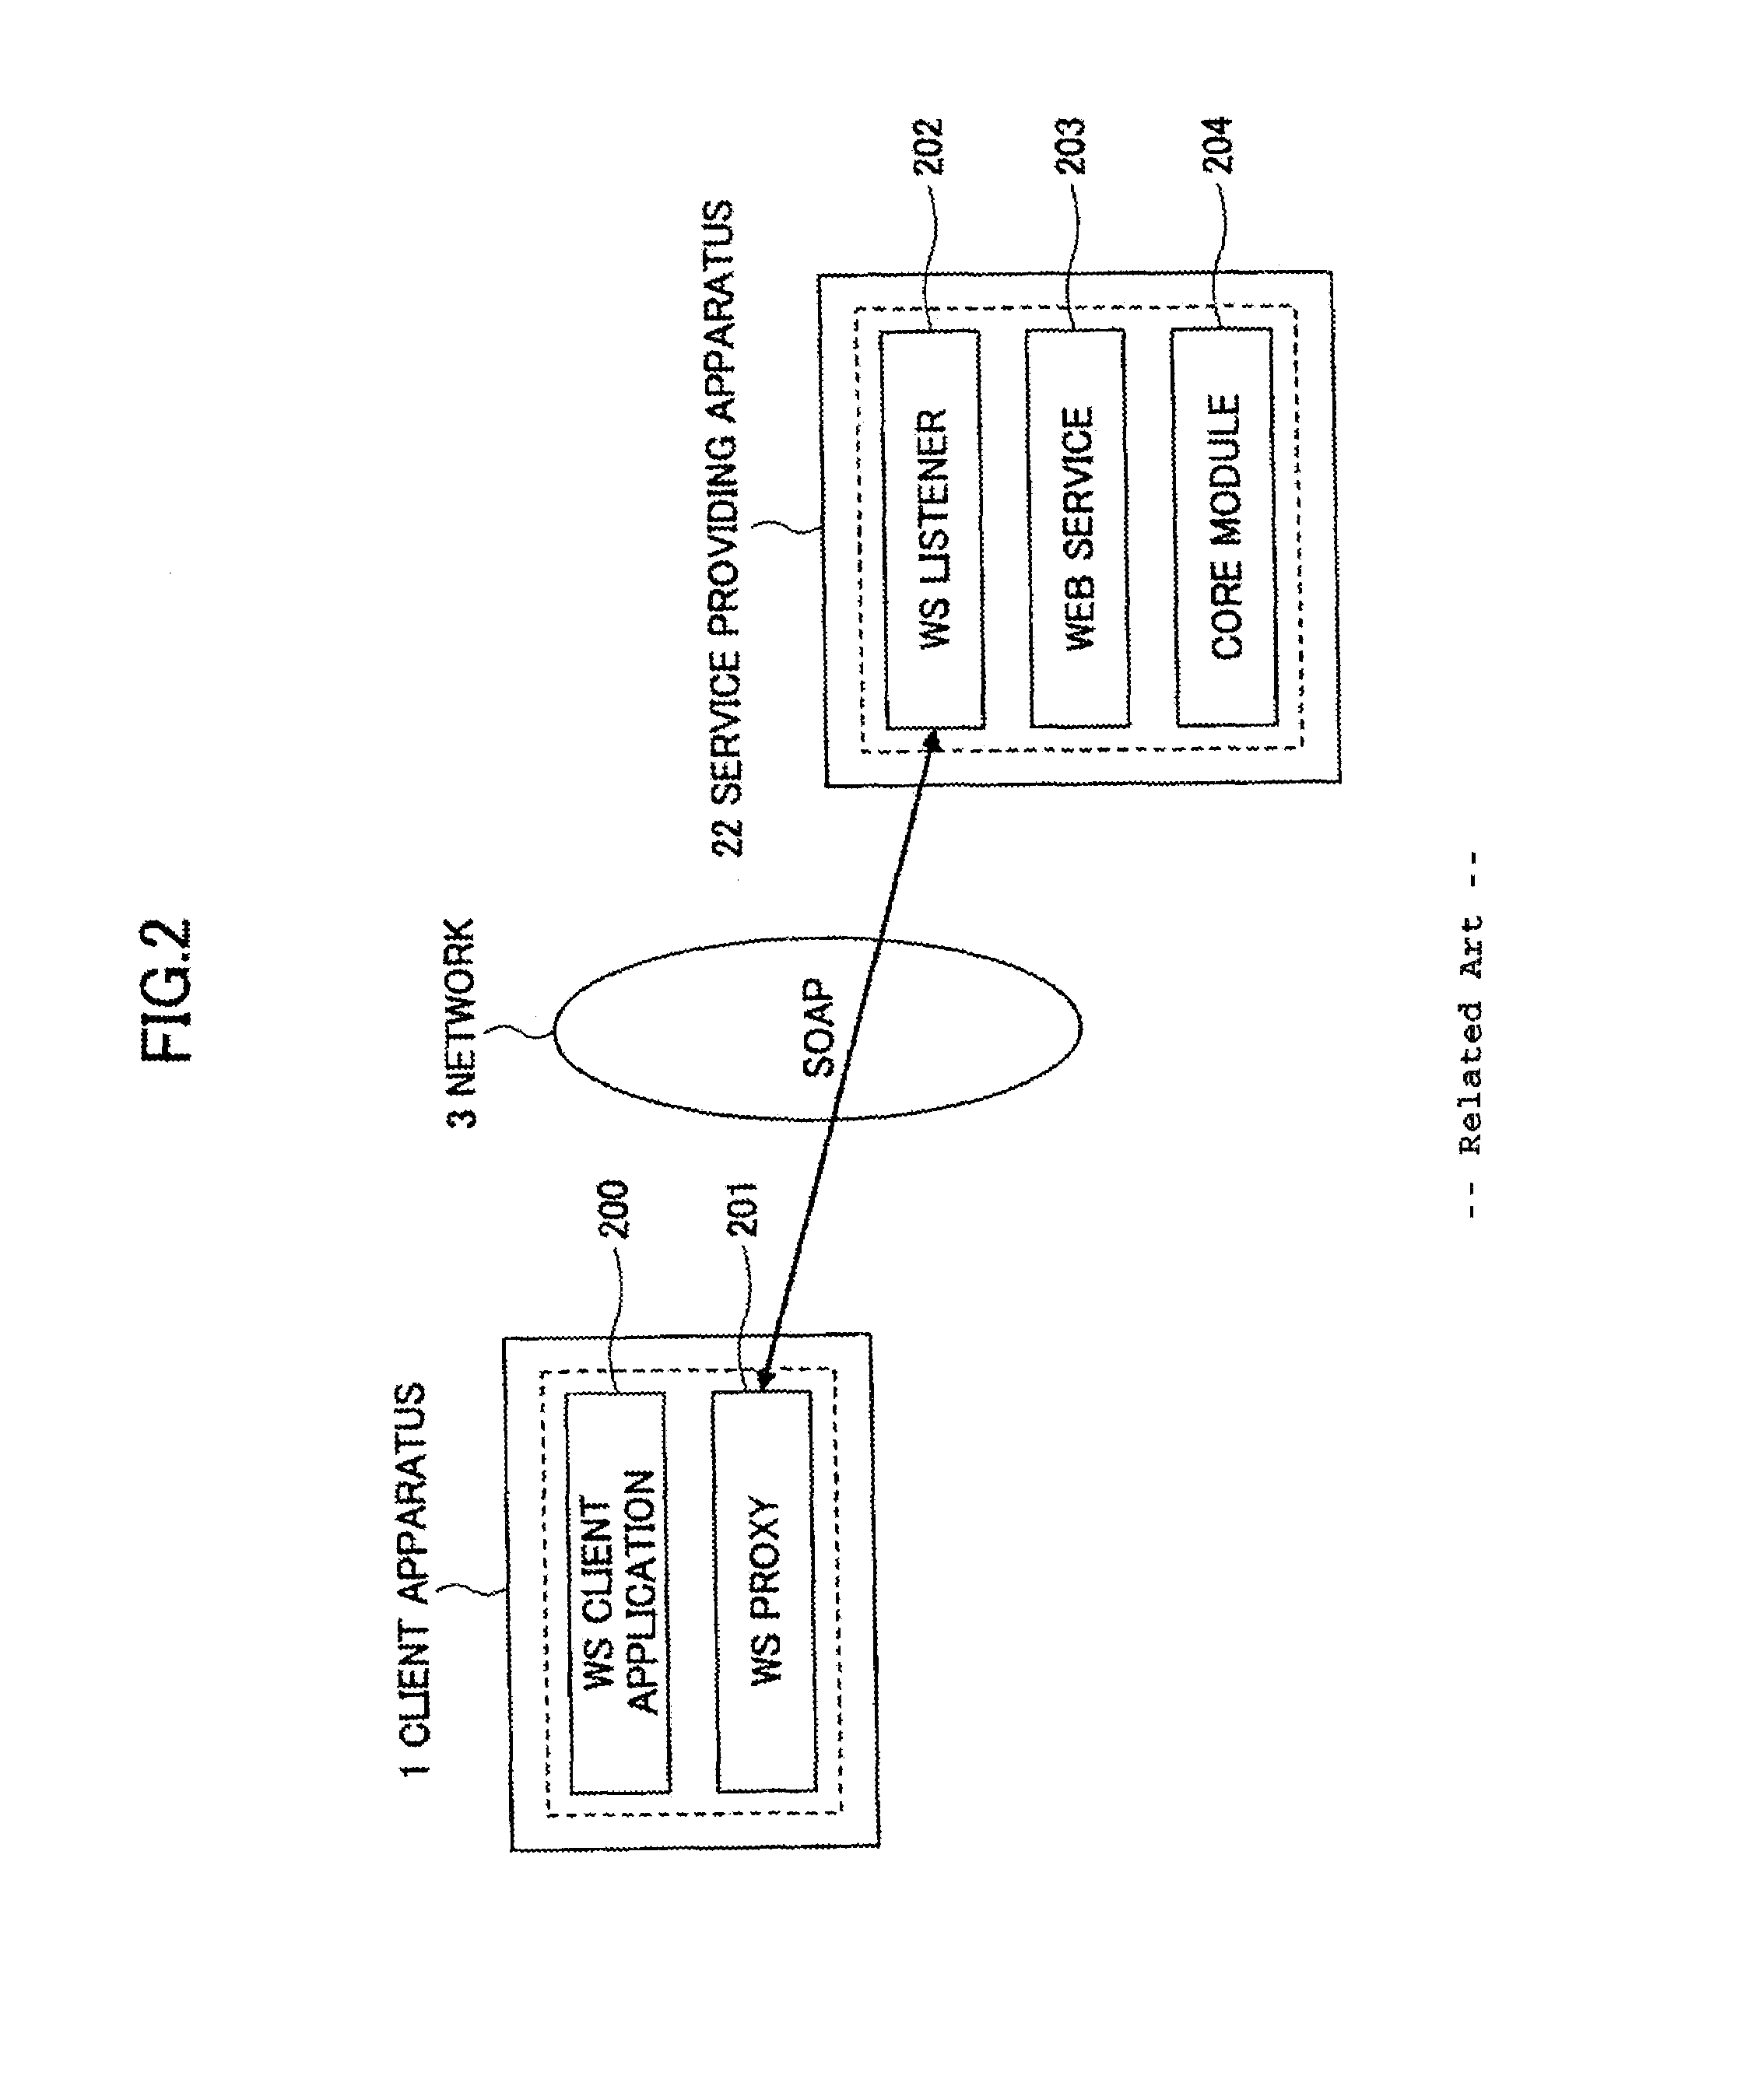 Communication method selection for exchanging information between service requester and service provider